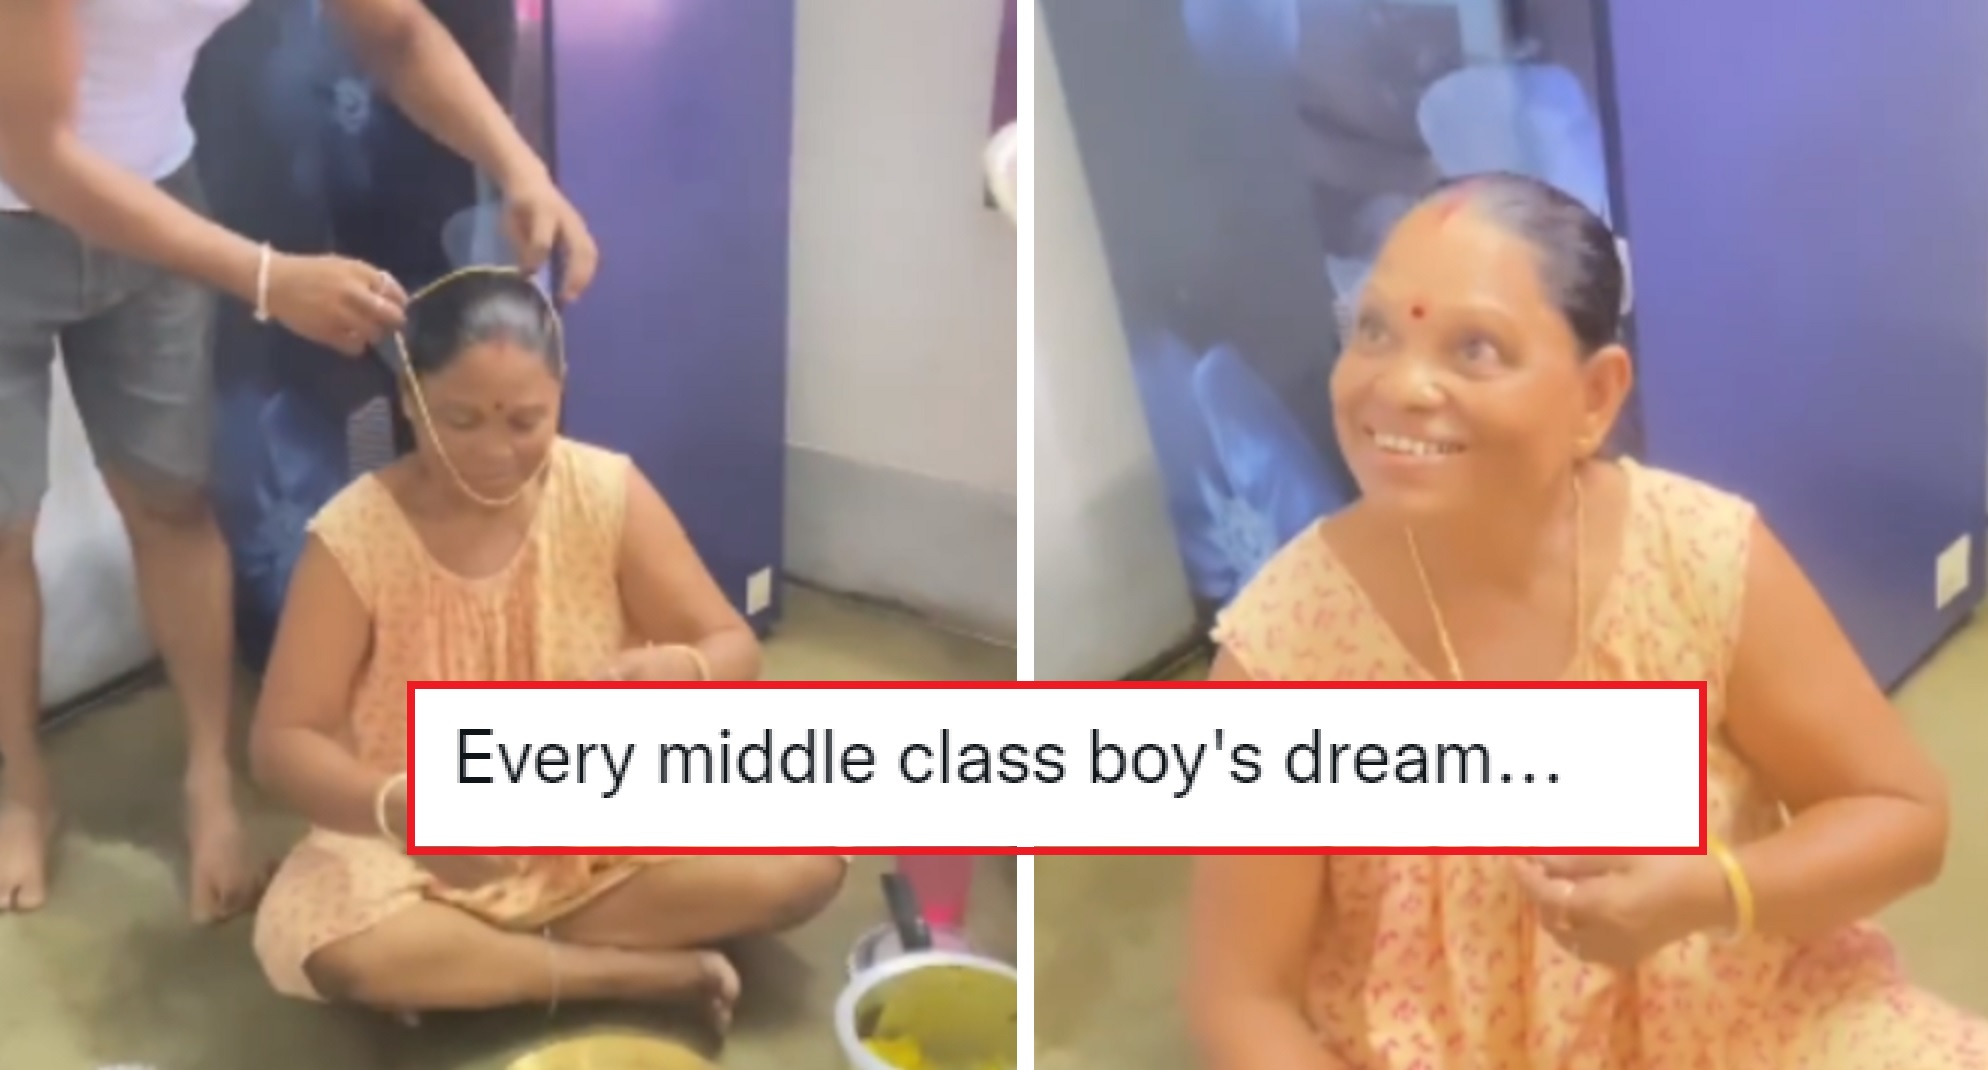 Heartwarming Video: Man Surprises His Mom With A Gold Chain, Her Priceless Reaction Goes Viral